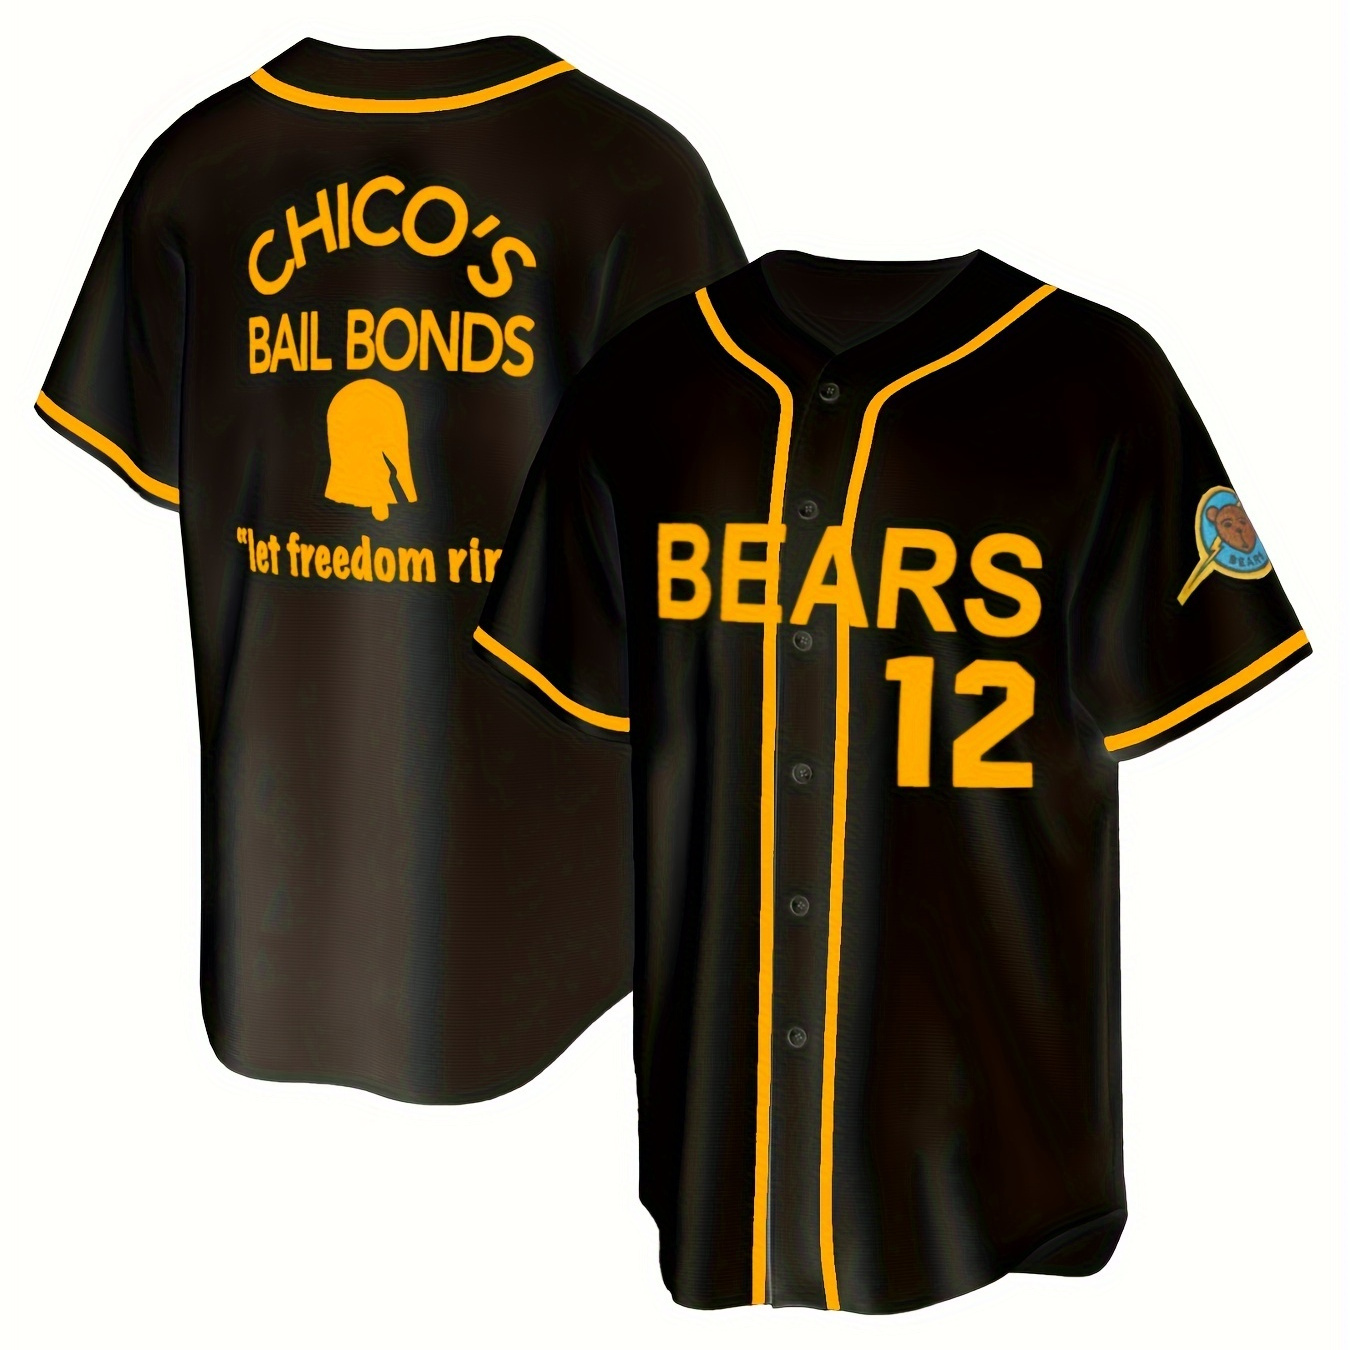 

Men's Bears 12 Embroidery Print Baseball Jersey, Breathable Button Up Short Sleeve V Neck Sports Uniform For Training Competition